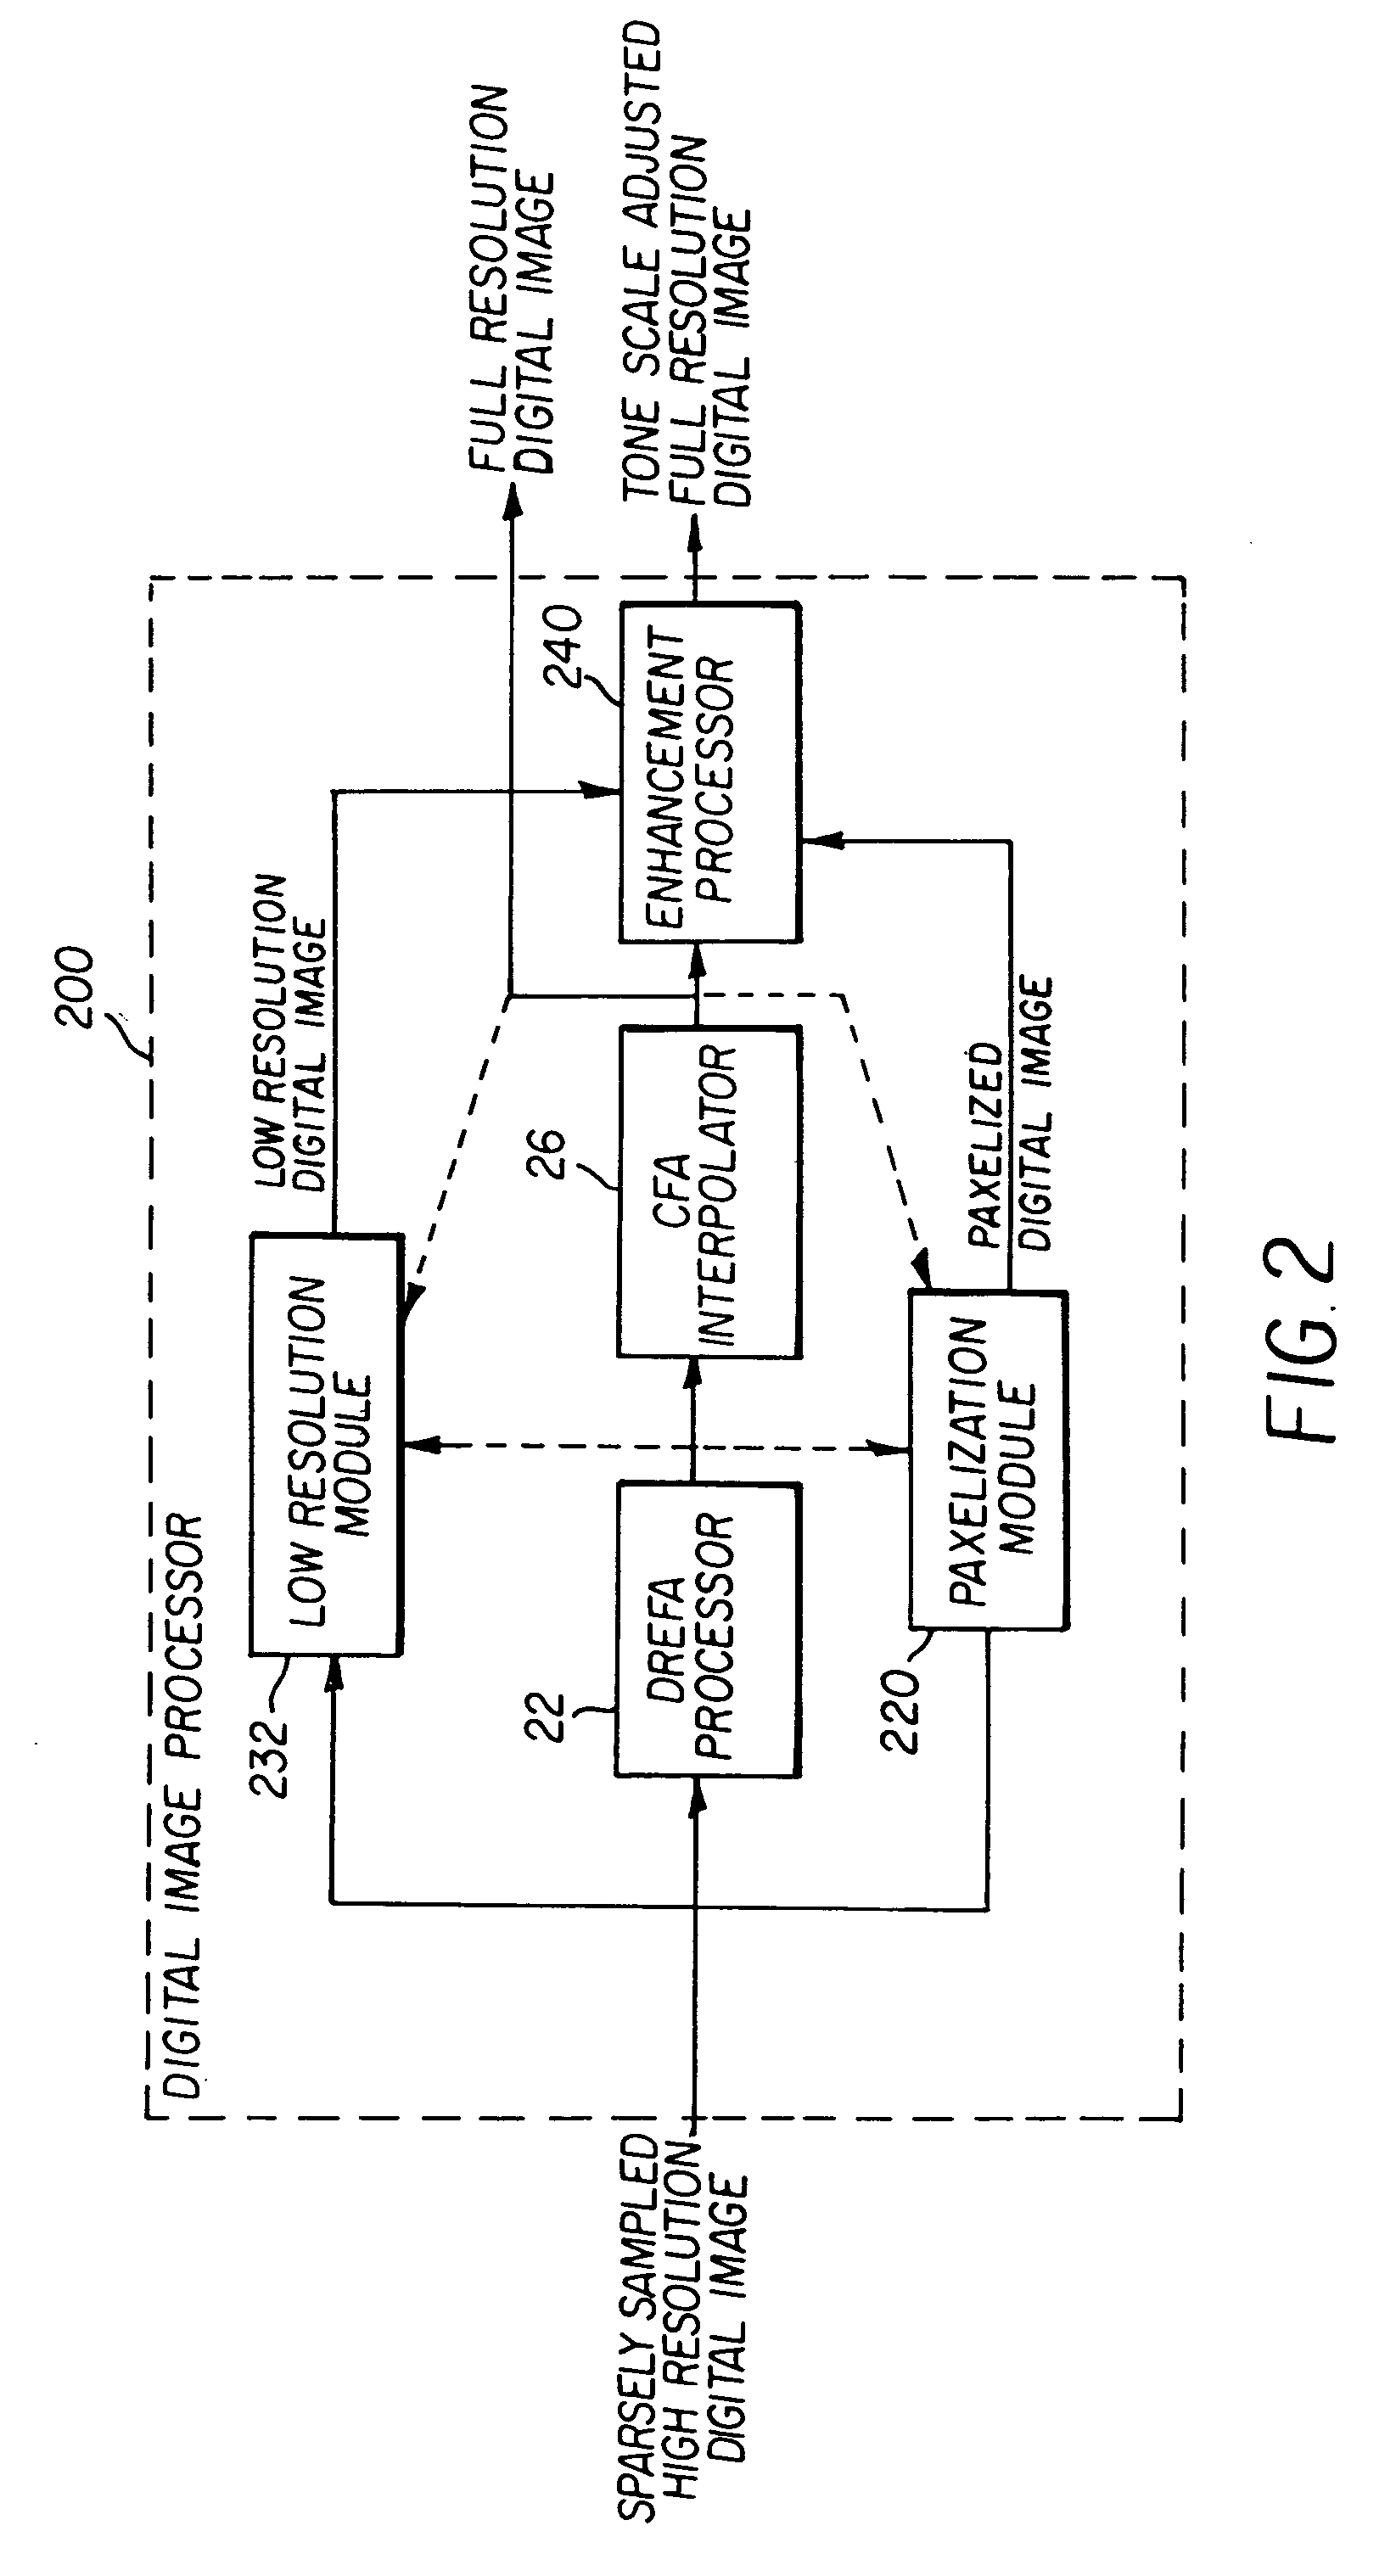 Method and apparatus for performing tone scale modifications on a sparsely sampled extended dynamic range digital image